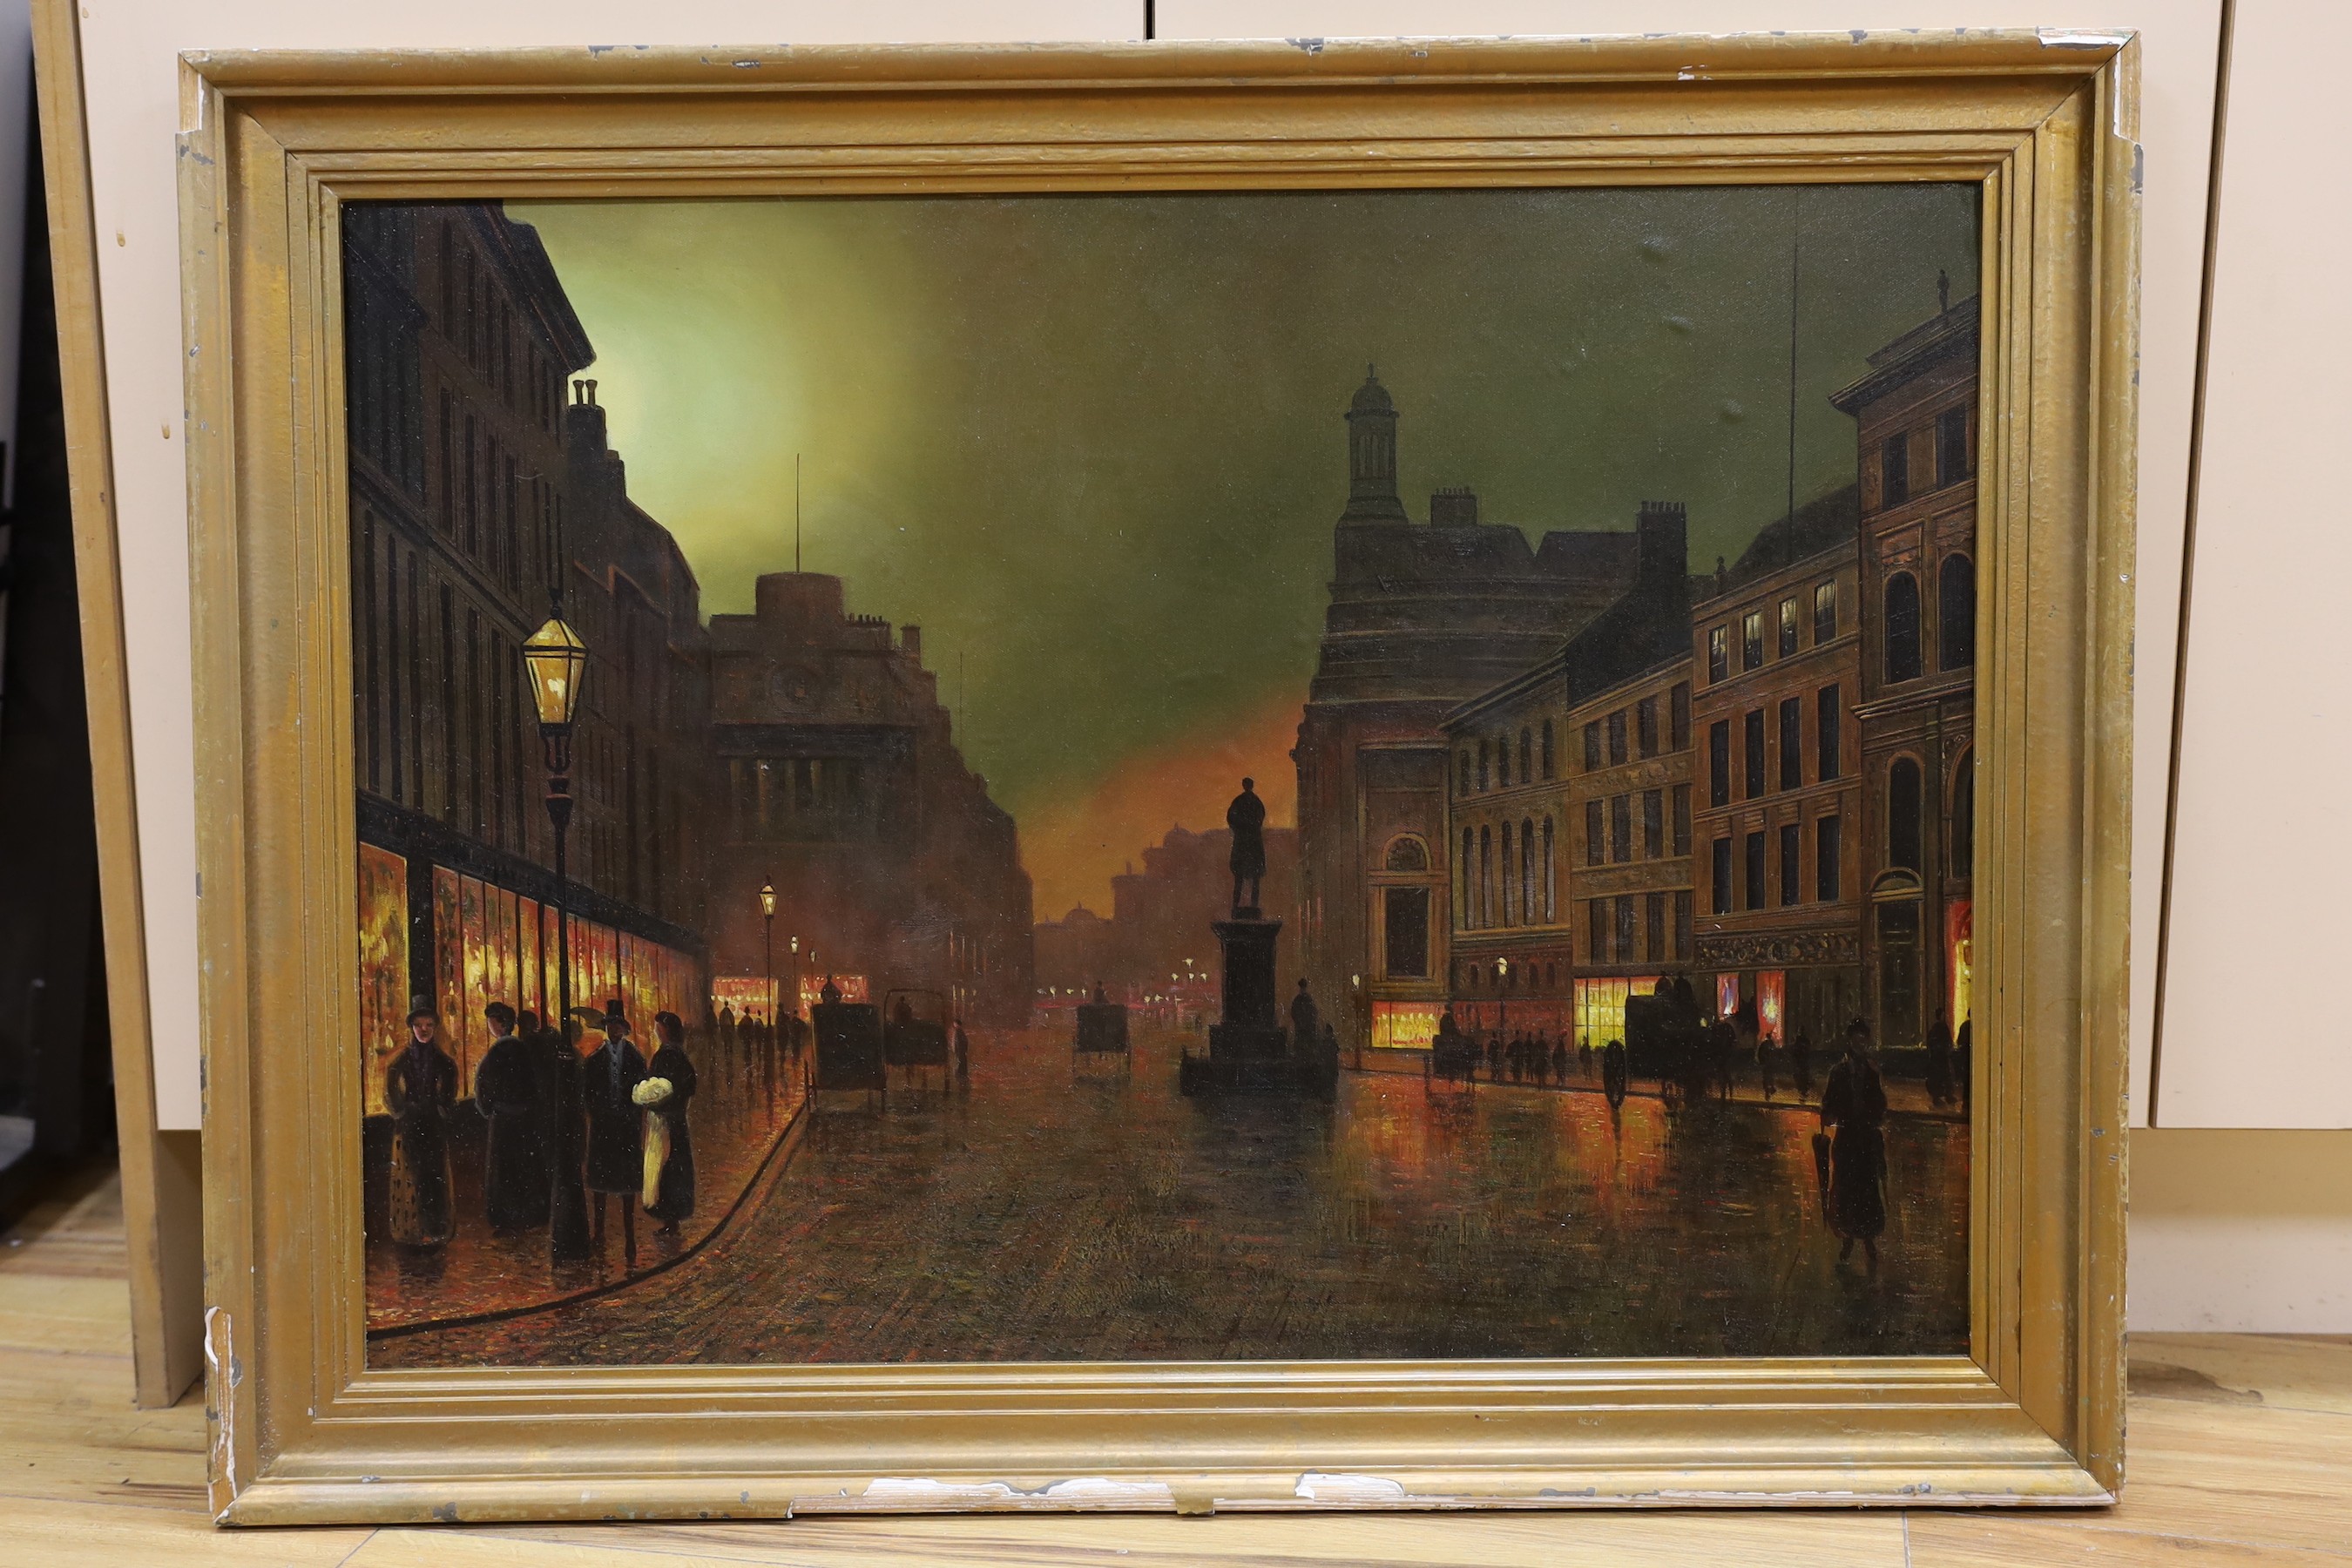 After Atkinson Grimshaw, oil on board, Street scene at night, bears signature, 55 x 76cm